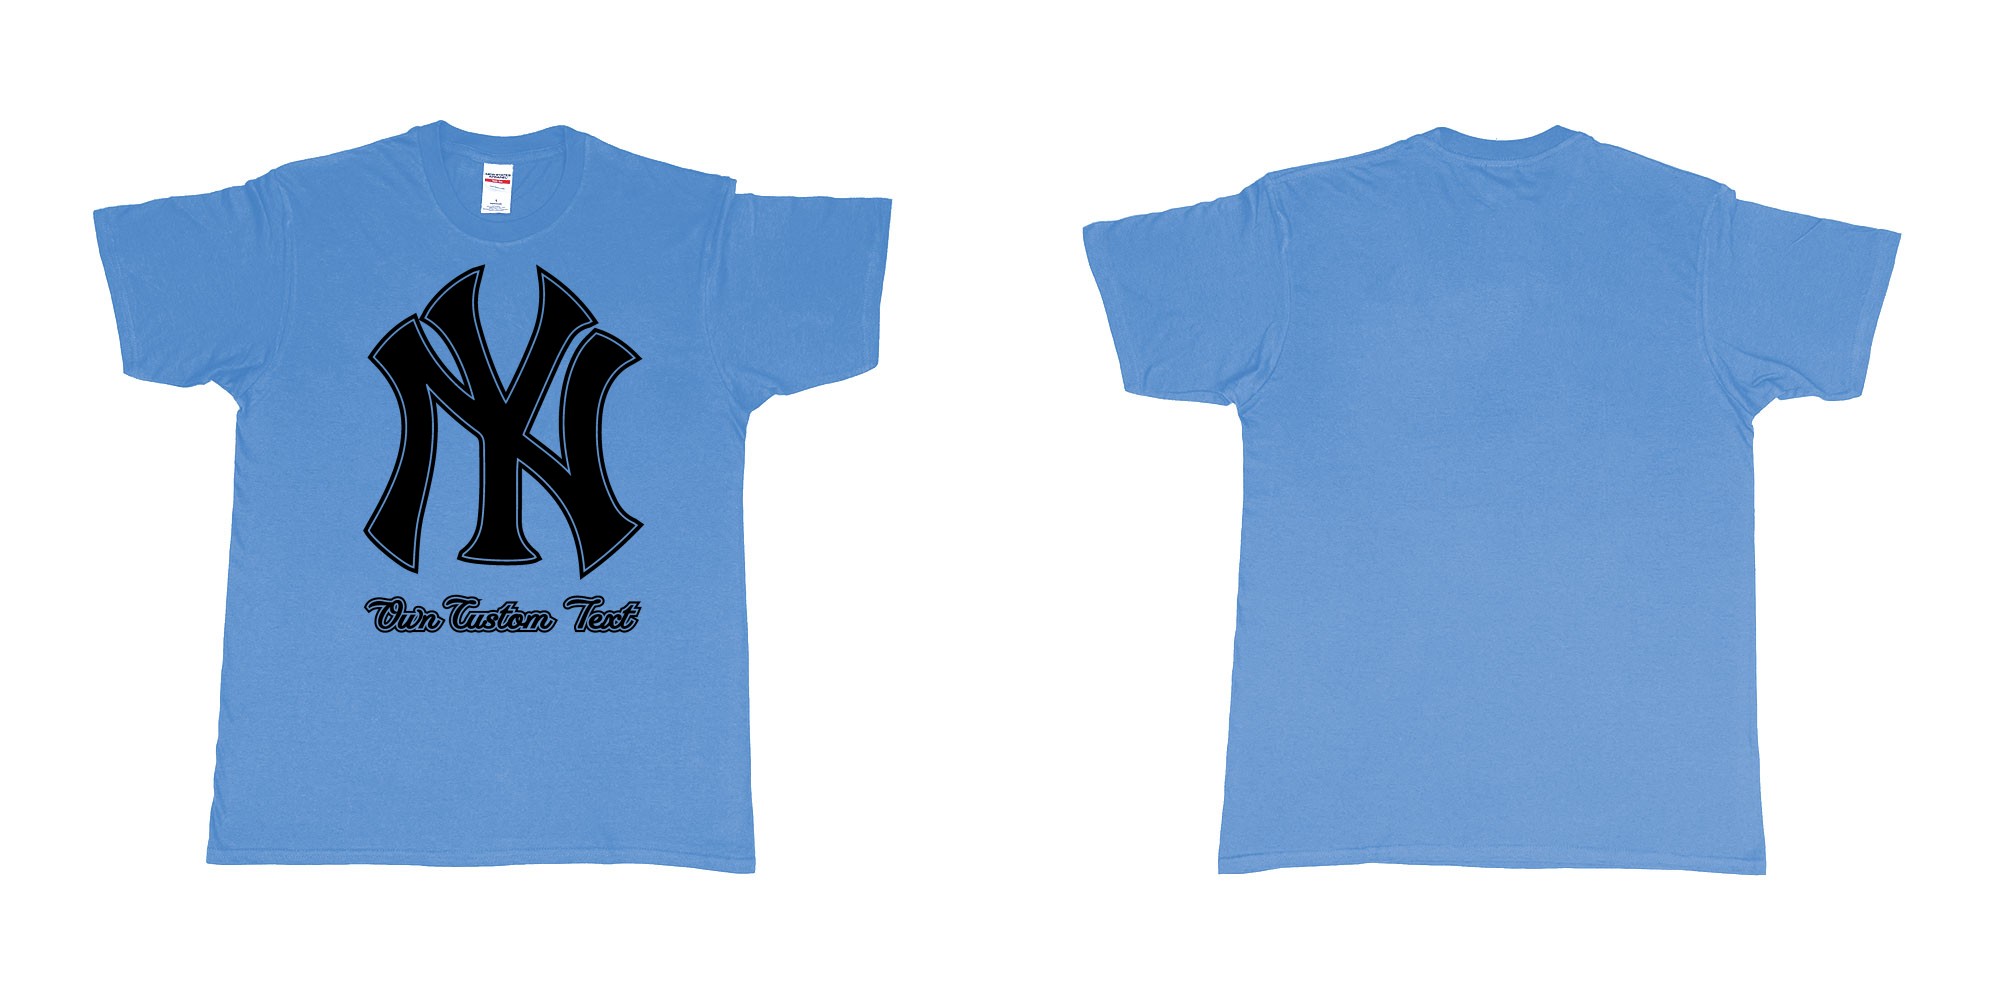 Custom tshirt design new york yankees baseball team custom design in fabric color carolina-blue choice your own text made in Bali by The Pirate Way